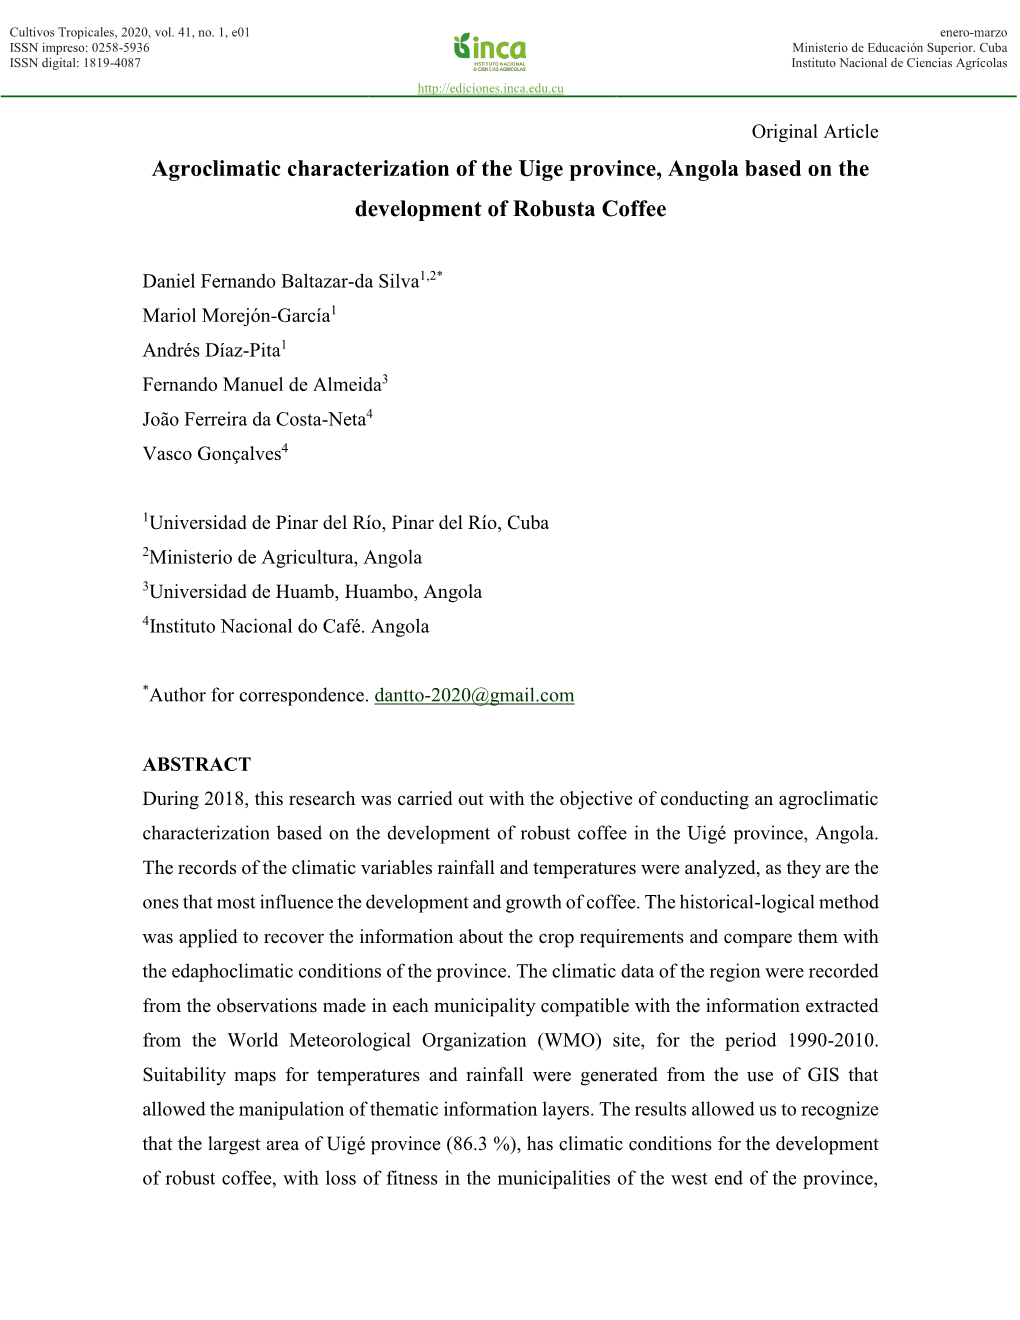 Agroclimatic Characterization of the Uige Province, Angola Based on the Development of Robusta Coffee